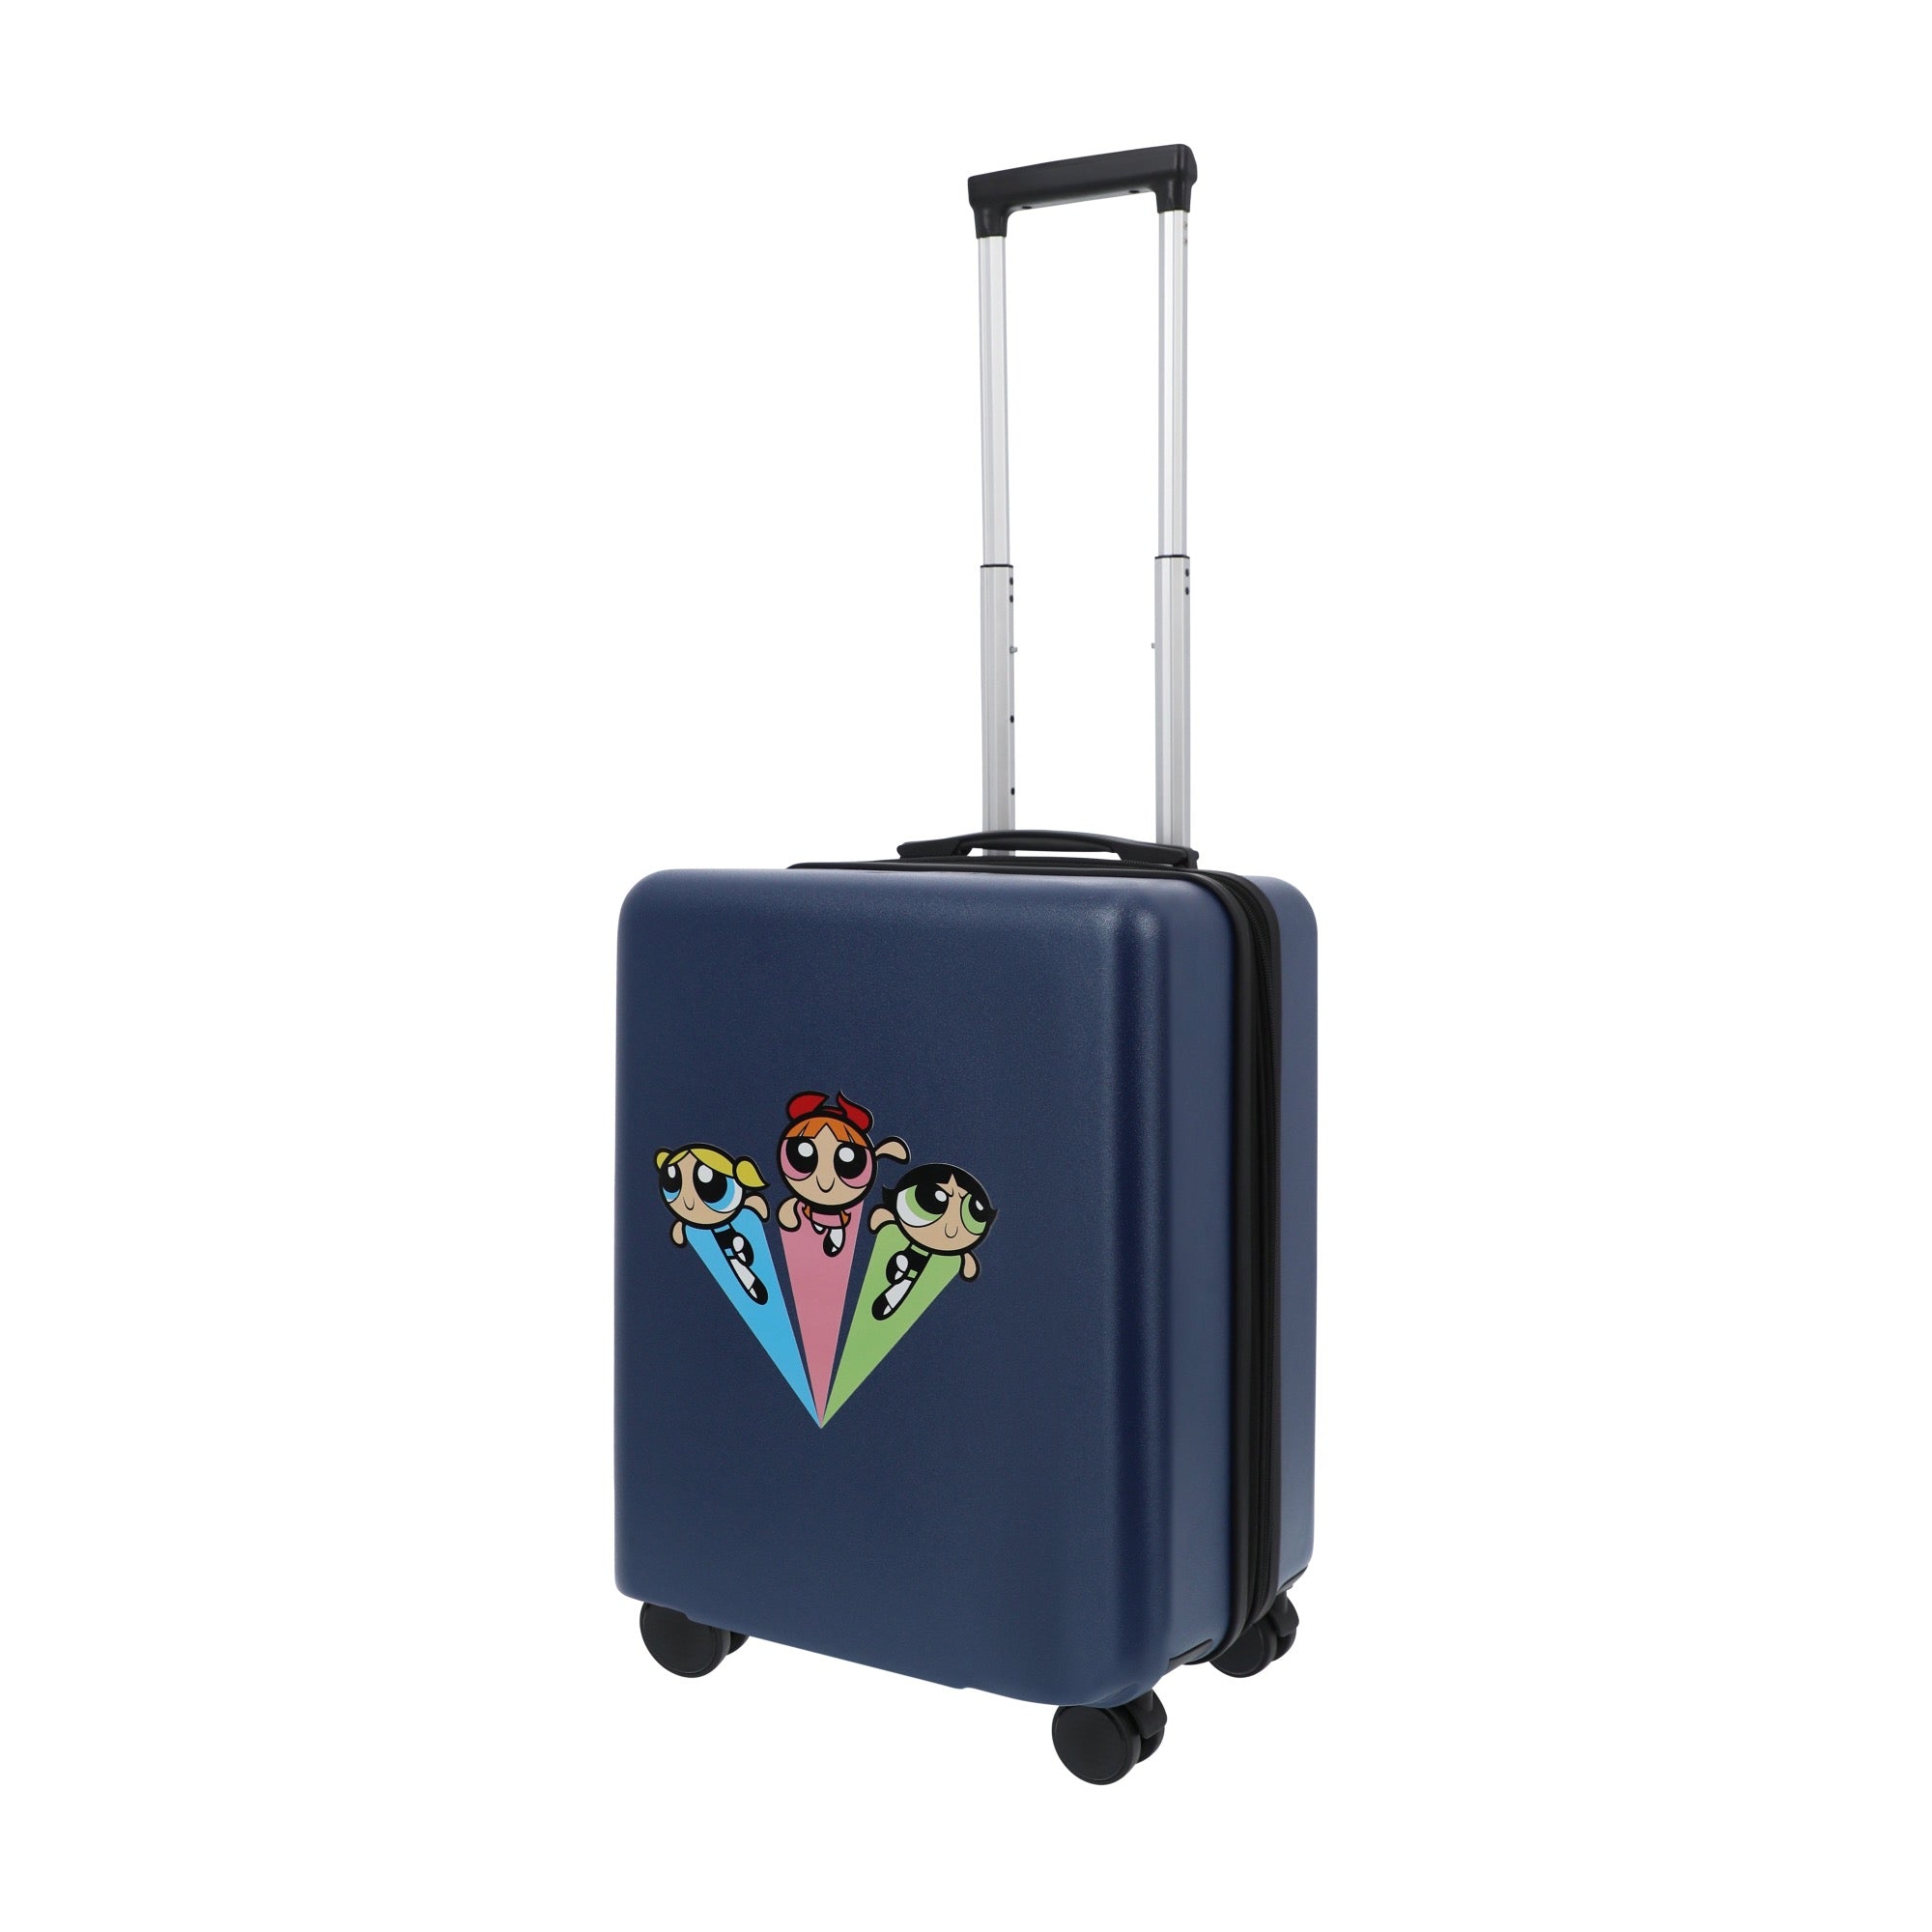 Navy blue WB powerpuff girls 22.5" carry-on spinner suitcase luggage by Ful